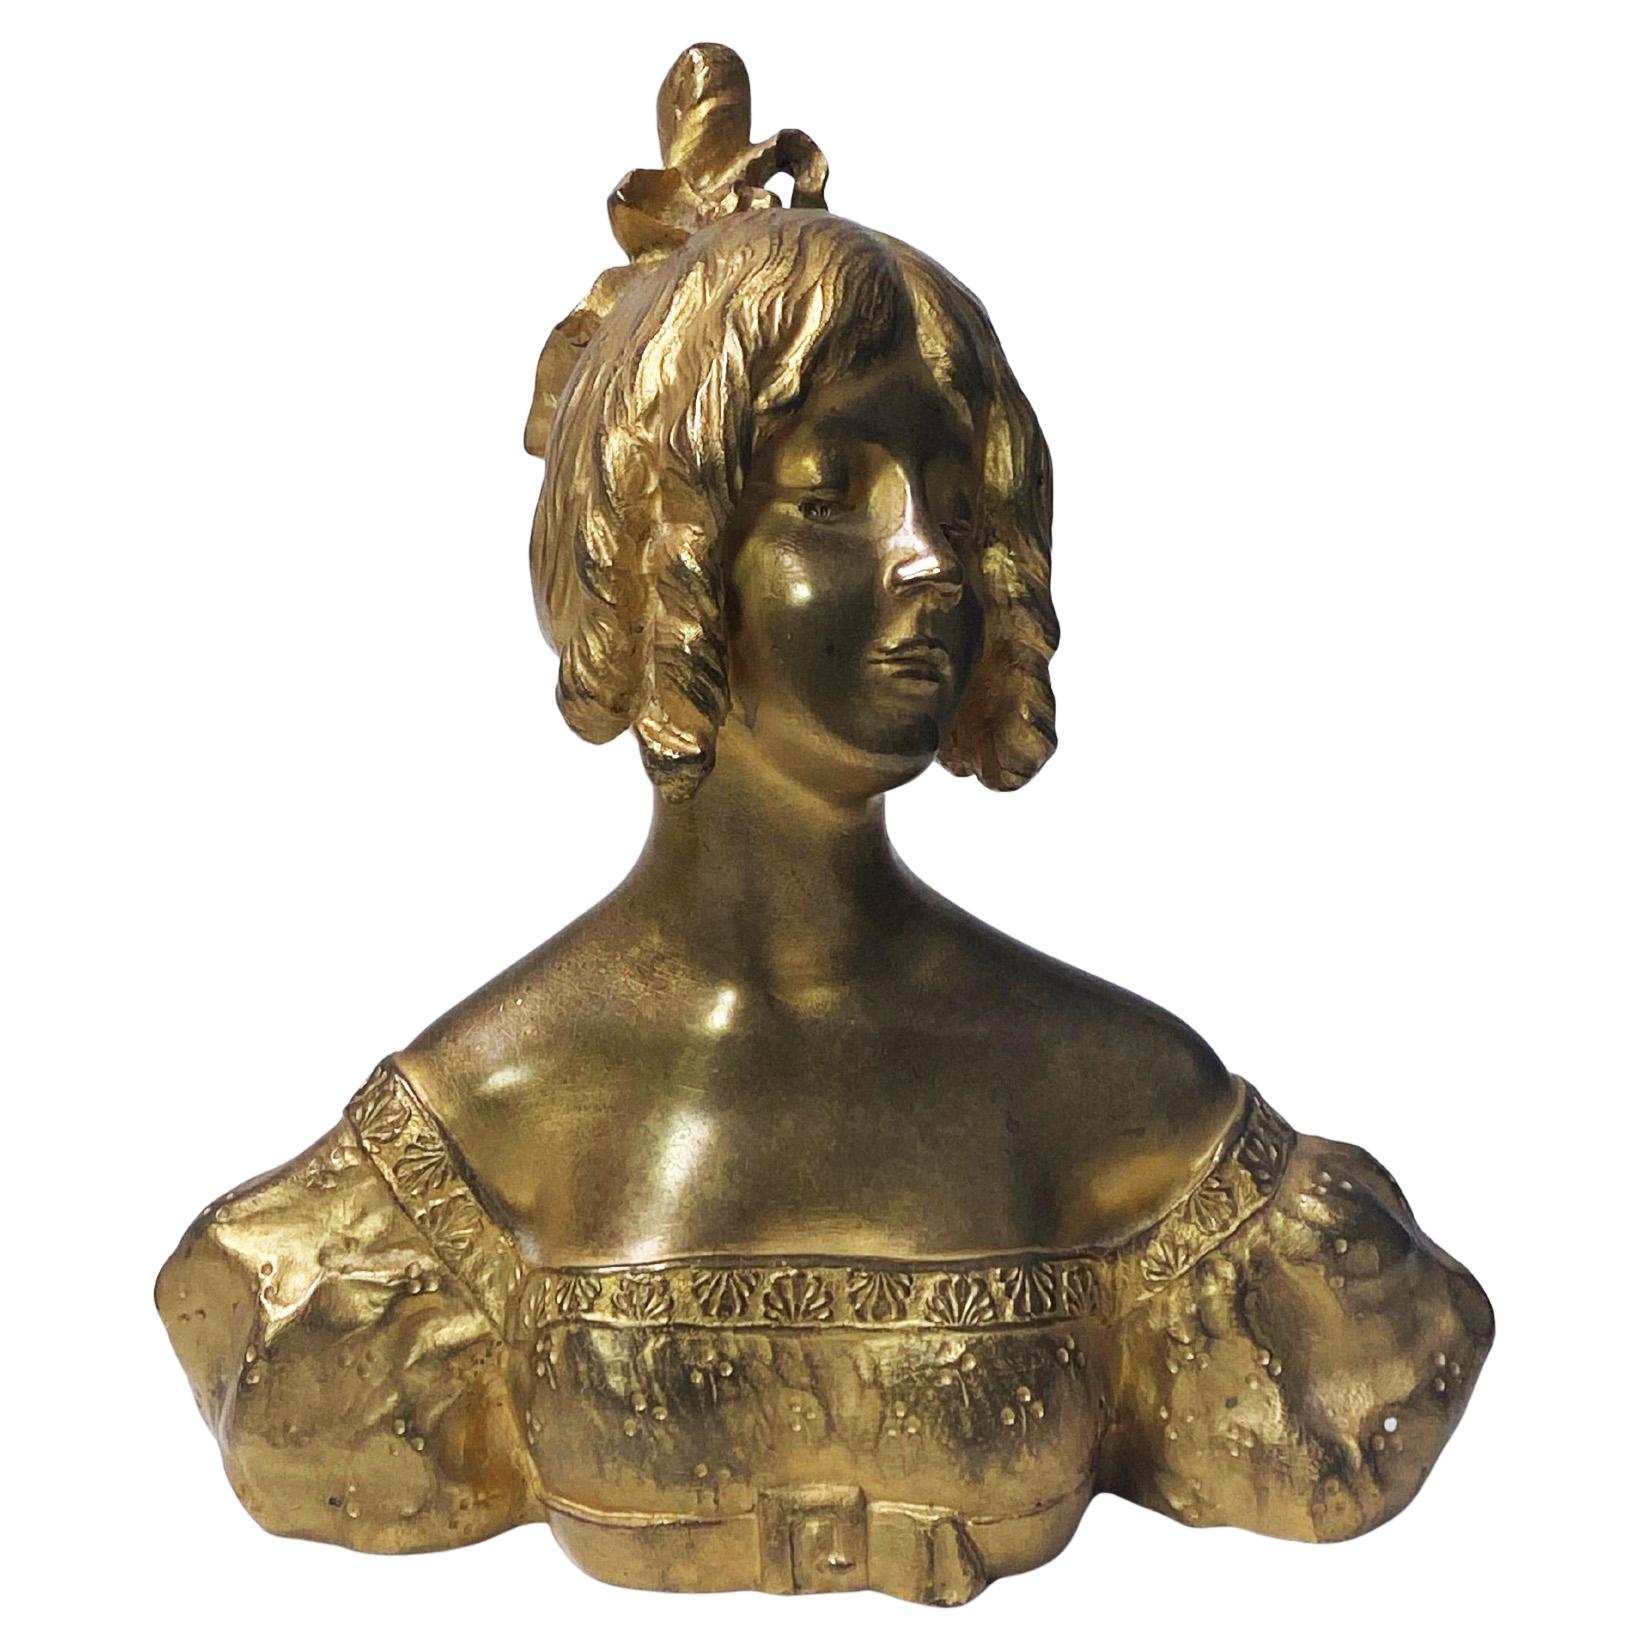 Art Nouveau gilt bronze maiden, stamped for Louchet Foundry France, circa 1910. Lovely patination shows very little signs of wear and is very even throughout. Measures: 6.50 x 3.0 x 6.50 inches. Weight: 1.5 kg.